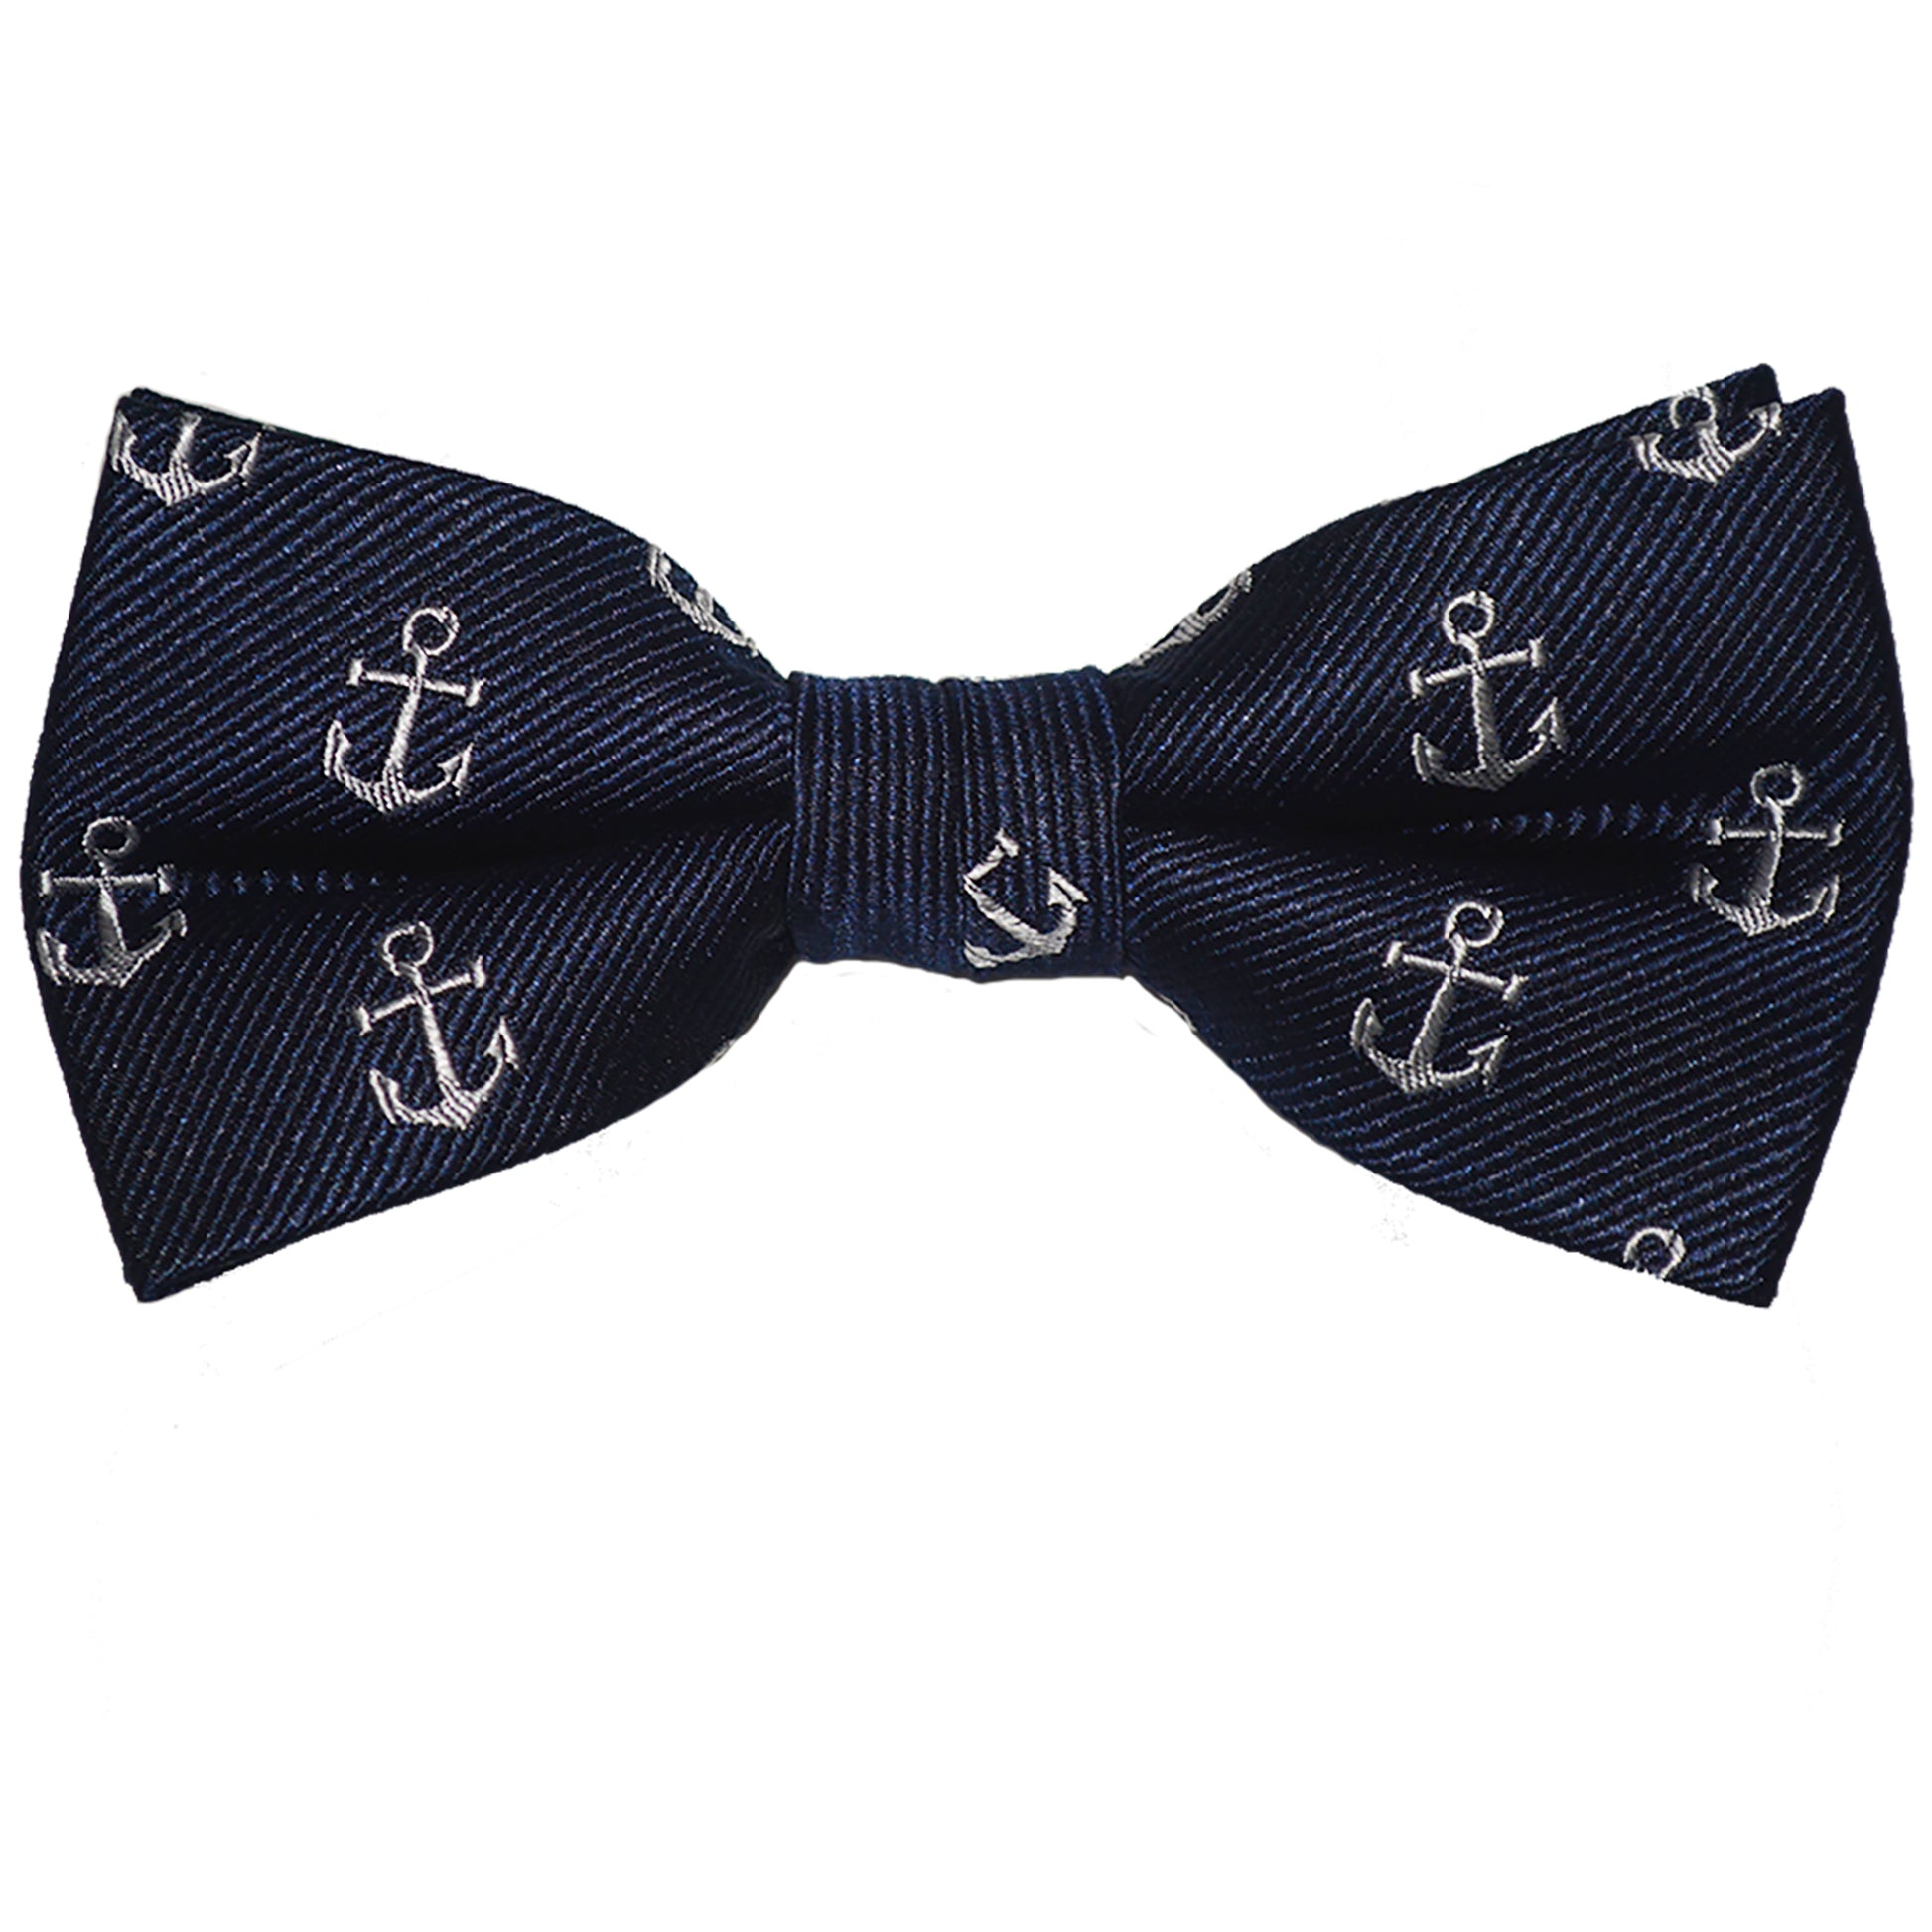 Anchor Bow Tie - White on Navy, Woven Silk, Pre-Tied for Kids - SummerTies